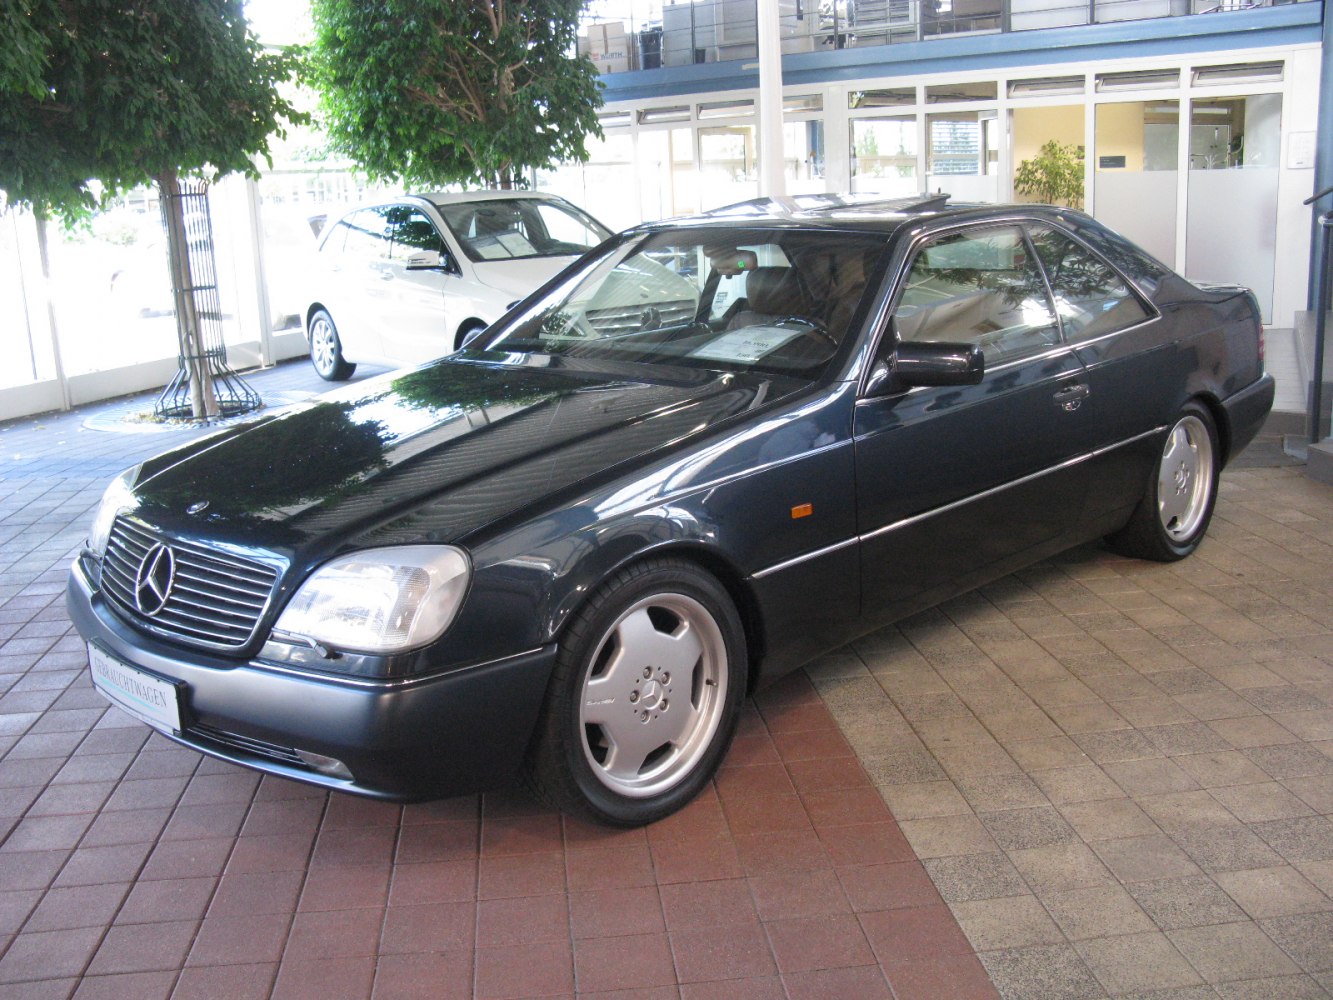 https://totalrenting.es/wp-content/uploads/2022/10/mercedes-benz-clase-s-coupe-c140-1992-s-420-v8-279-cv-4g-tronic-coupe.png